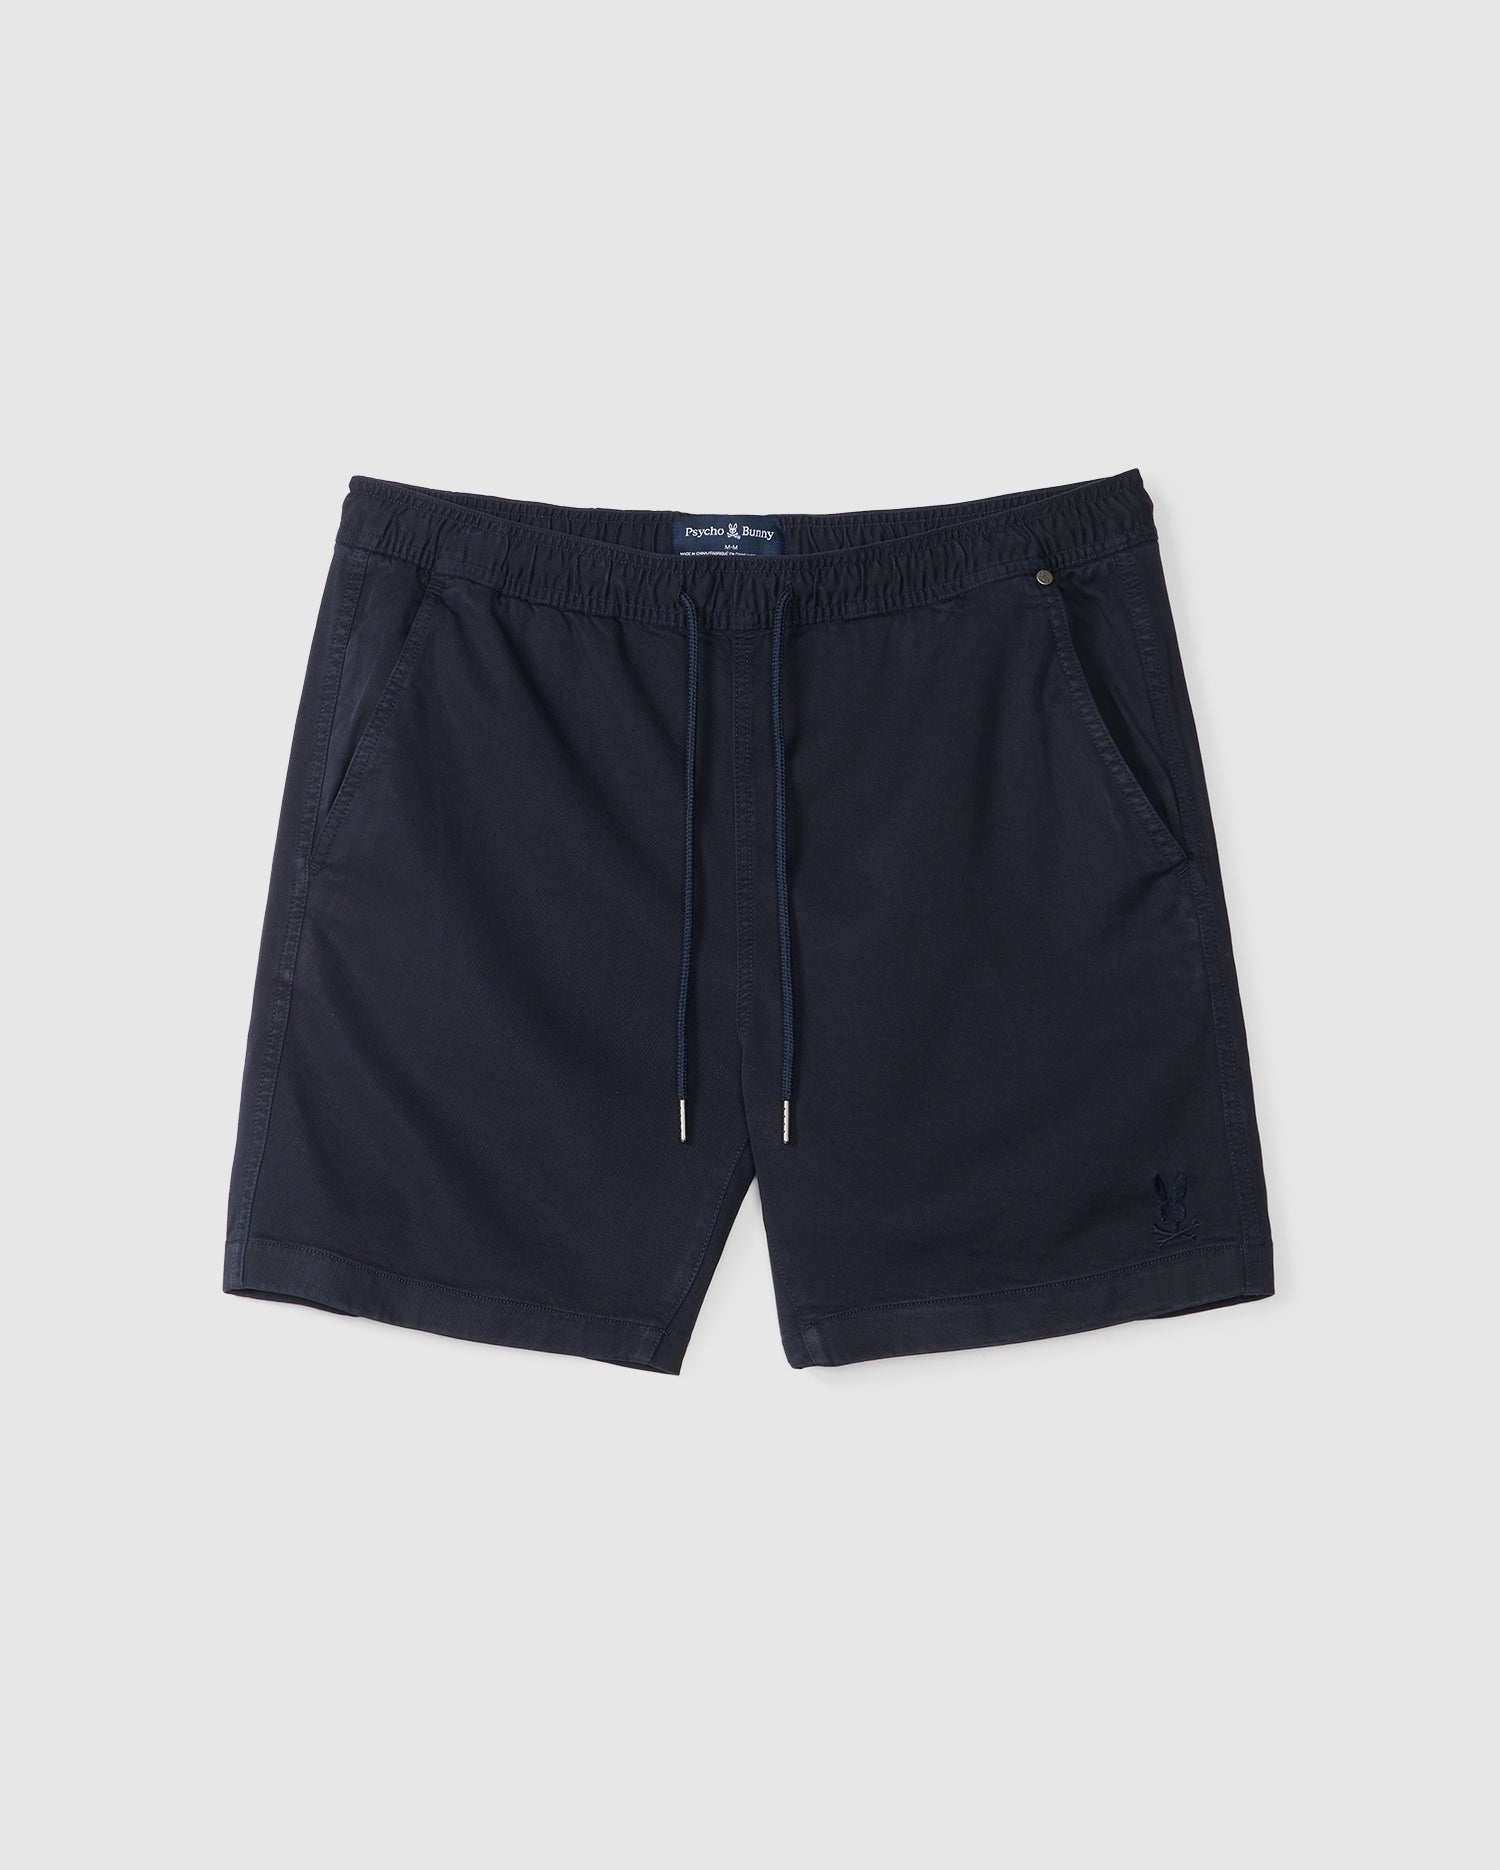 Navy blue Psycho Bunny men's stretch TENCEL™ swim shorts with elastic waistband and drawstring, featuring a small embroidered logo detail on the lower left leg.